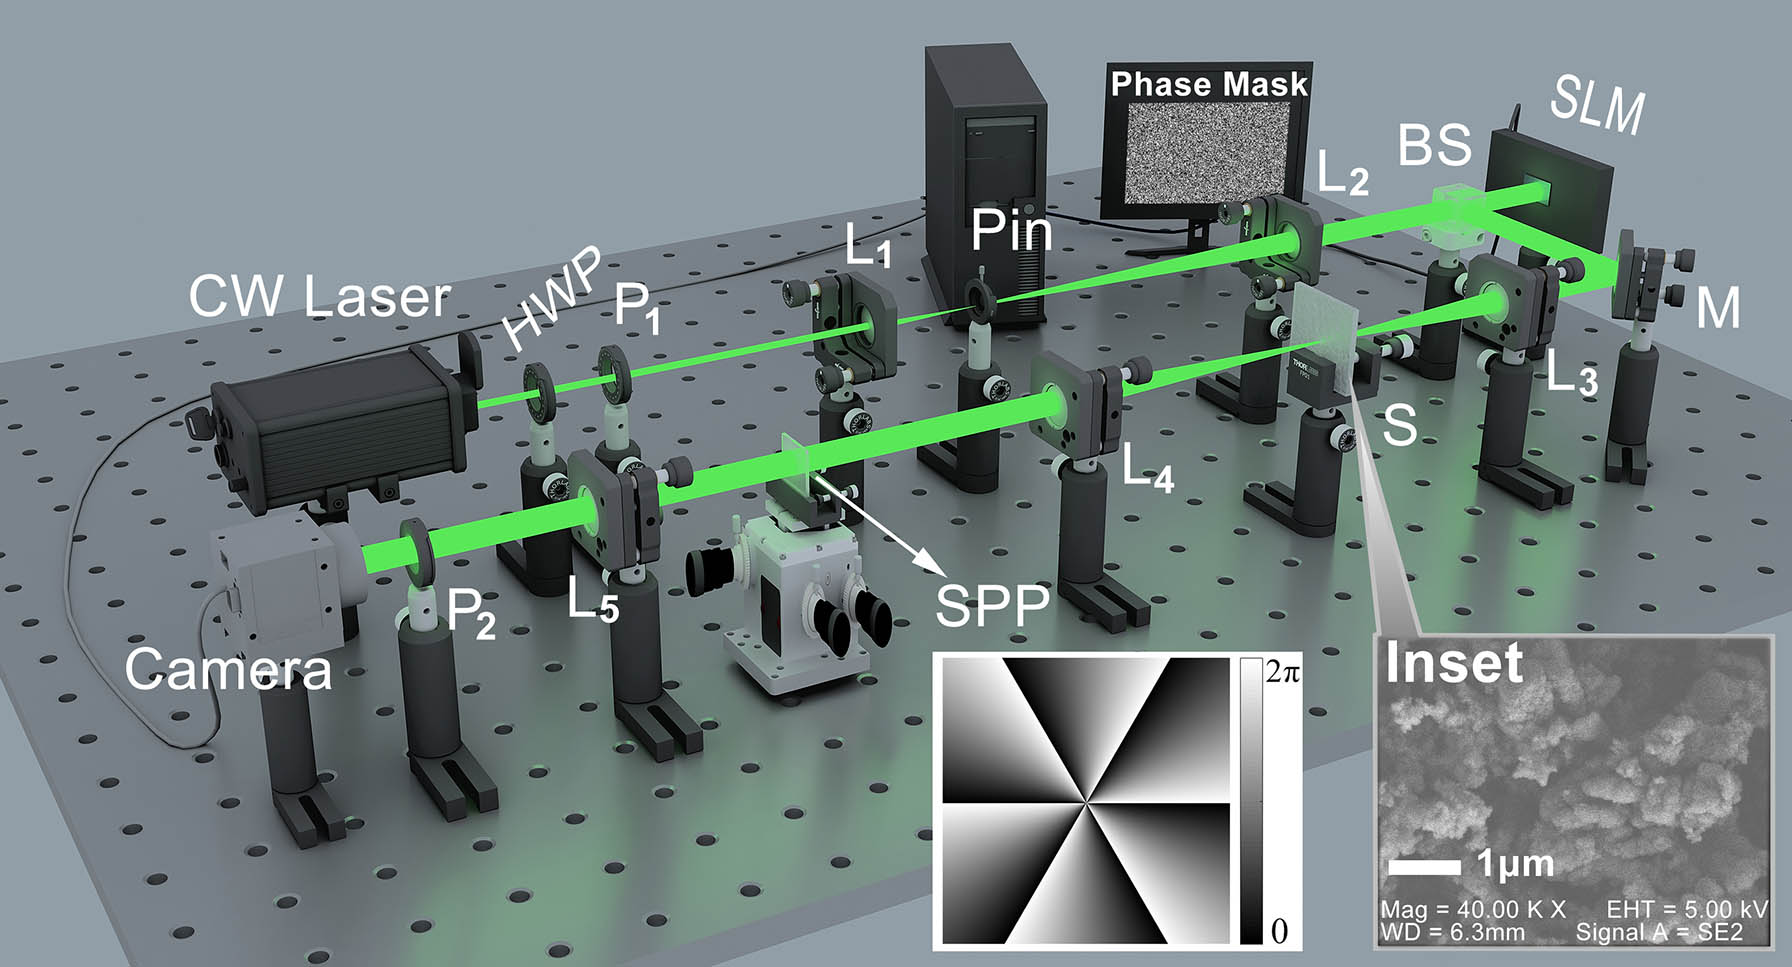 Experimental setup for OAM restoration behind the strongly scattering media. HWP, half-wavelength plate; P1, P2, linear polarizer; BS, beam splitter; SLM, spatial light modulator; M, reflecting mirror; SPP, spiral phase plate, which has a center-symmetrical phase distribution as shown; L1−5, lens; f1−5, 30, 200, 200, 200, 100 mm. Inset: a scanning electron microscopy image of the TiO2 powder.